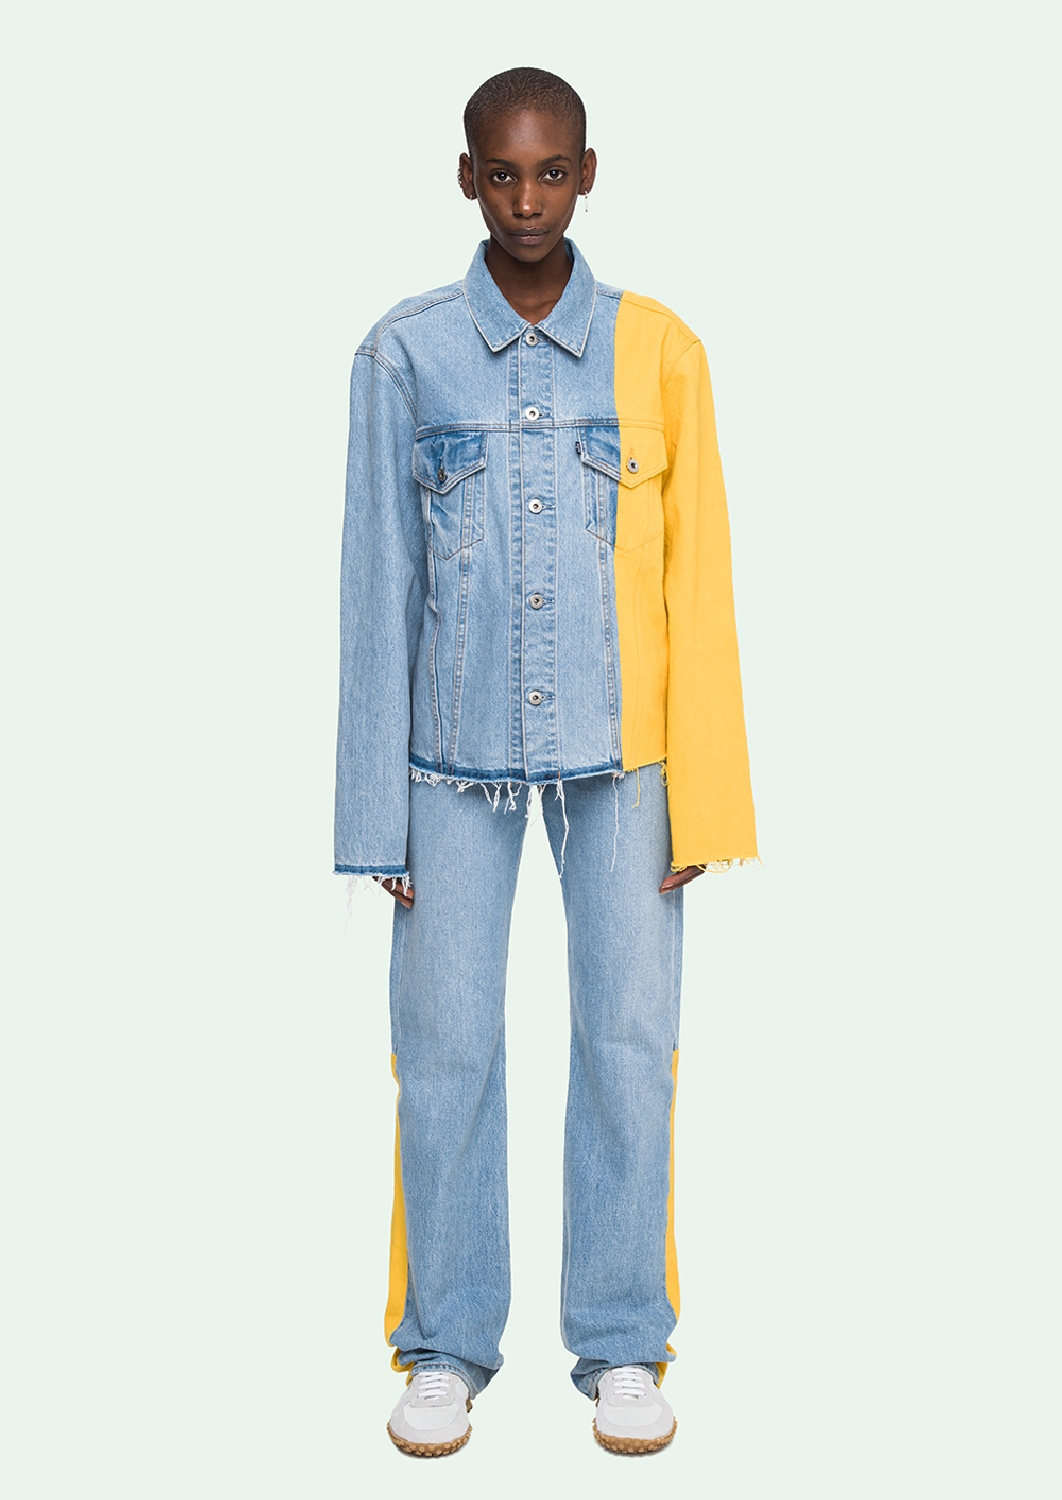 Levis Made & Crafted x Off White Fall 2016